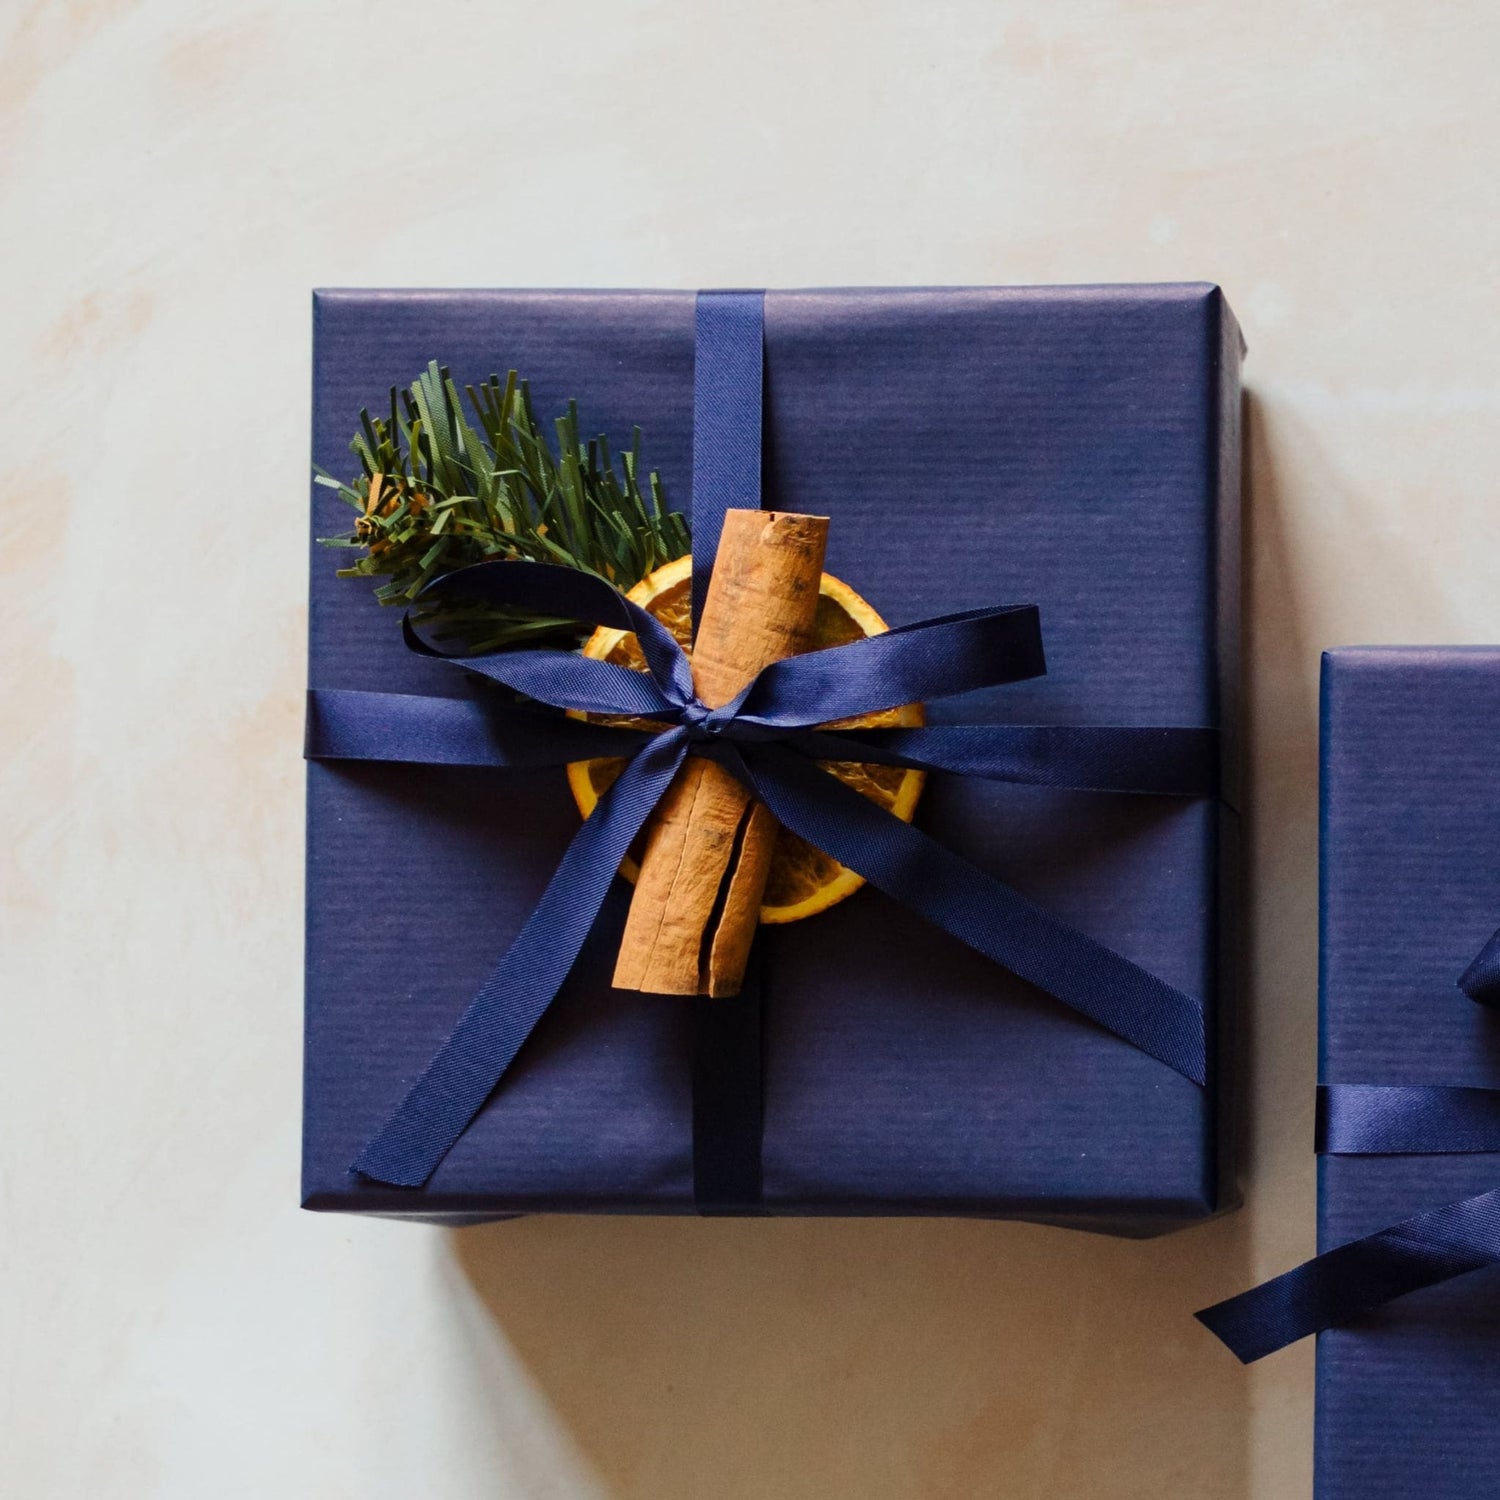 A 400g blackberry scented large 3 wick soy candle from the Home County Co. is shown with luxury Christmas Gift Wrap. The 3 wick candle is wrapped in luxury navy wrapping paper secured with navy ribbon and Christmas embellishments.